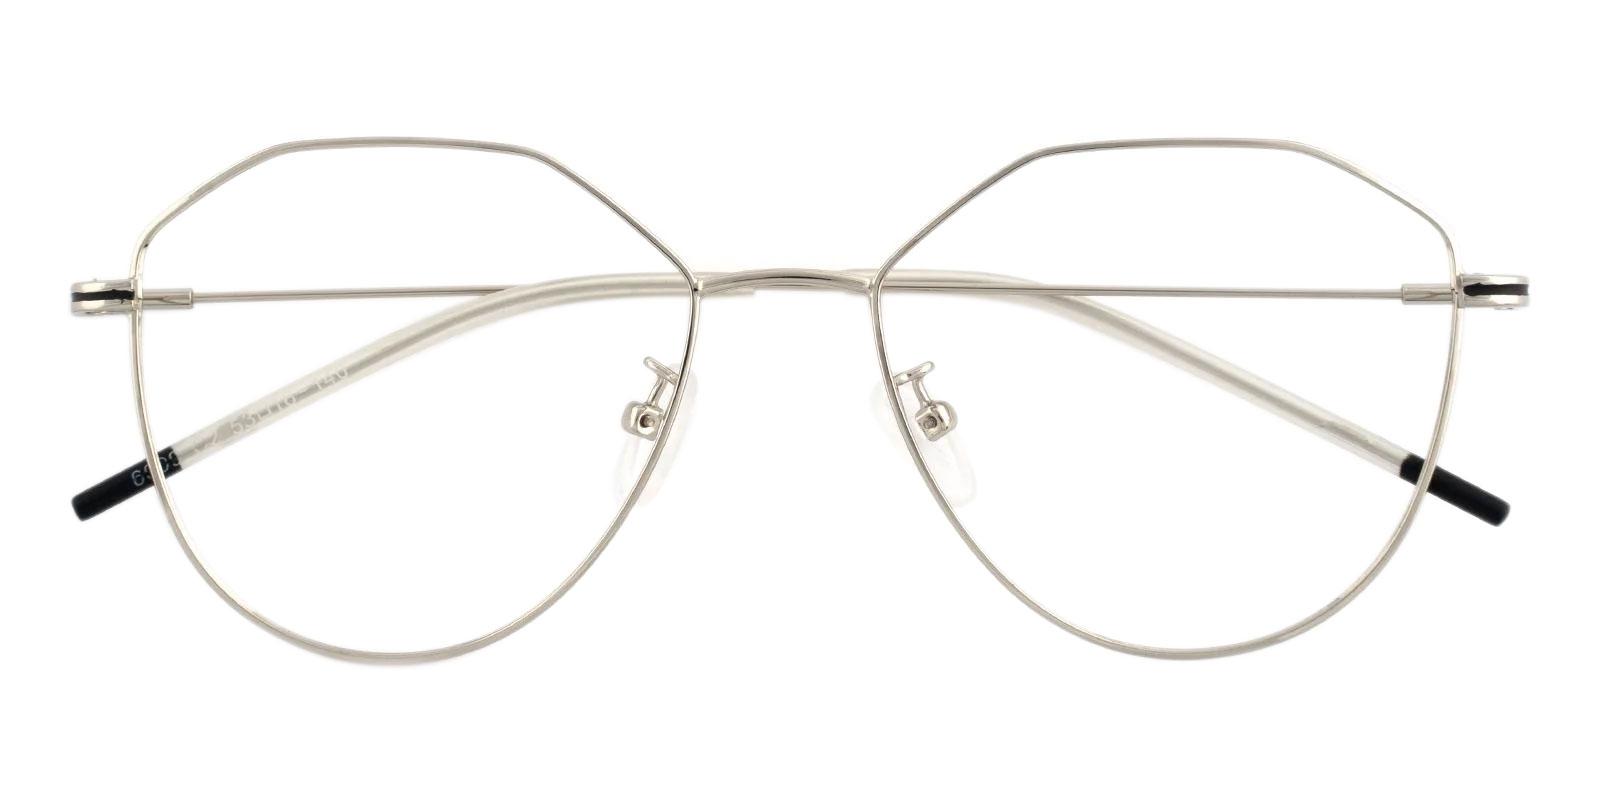 Layla Silver Metal Eyeglasses , Lightweight , NosePads Frames from ABBE Glasses